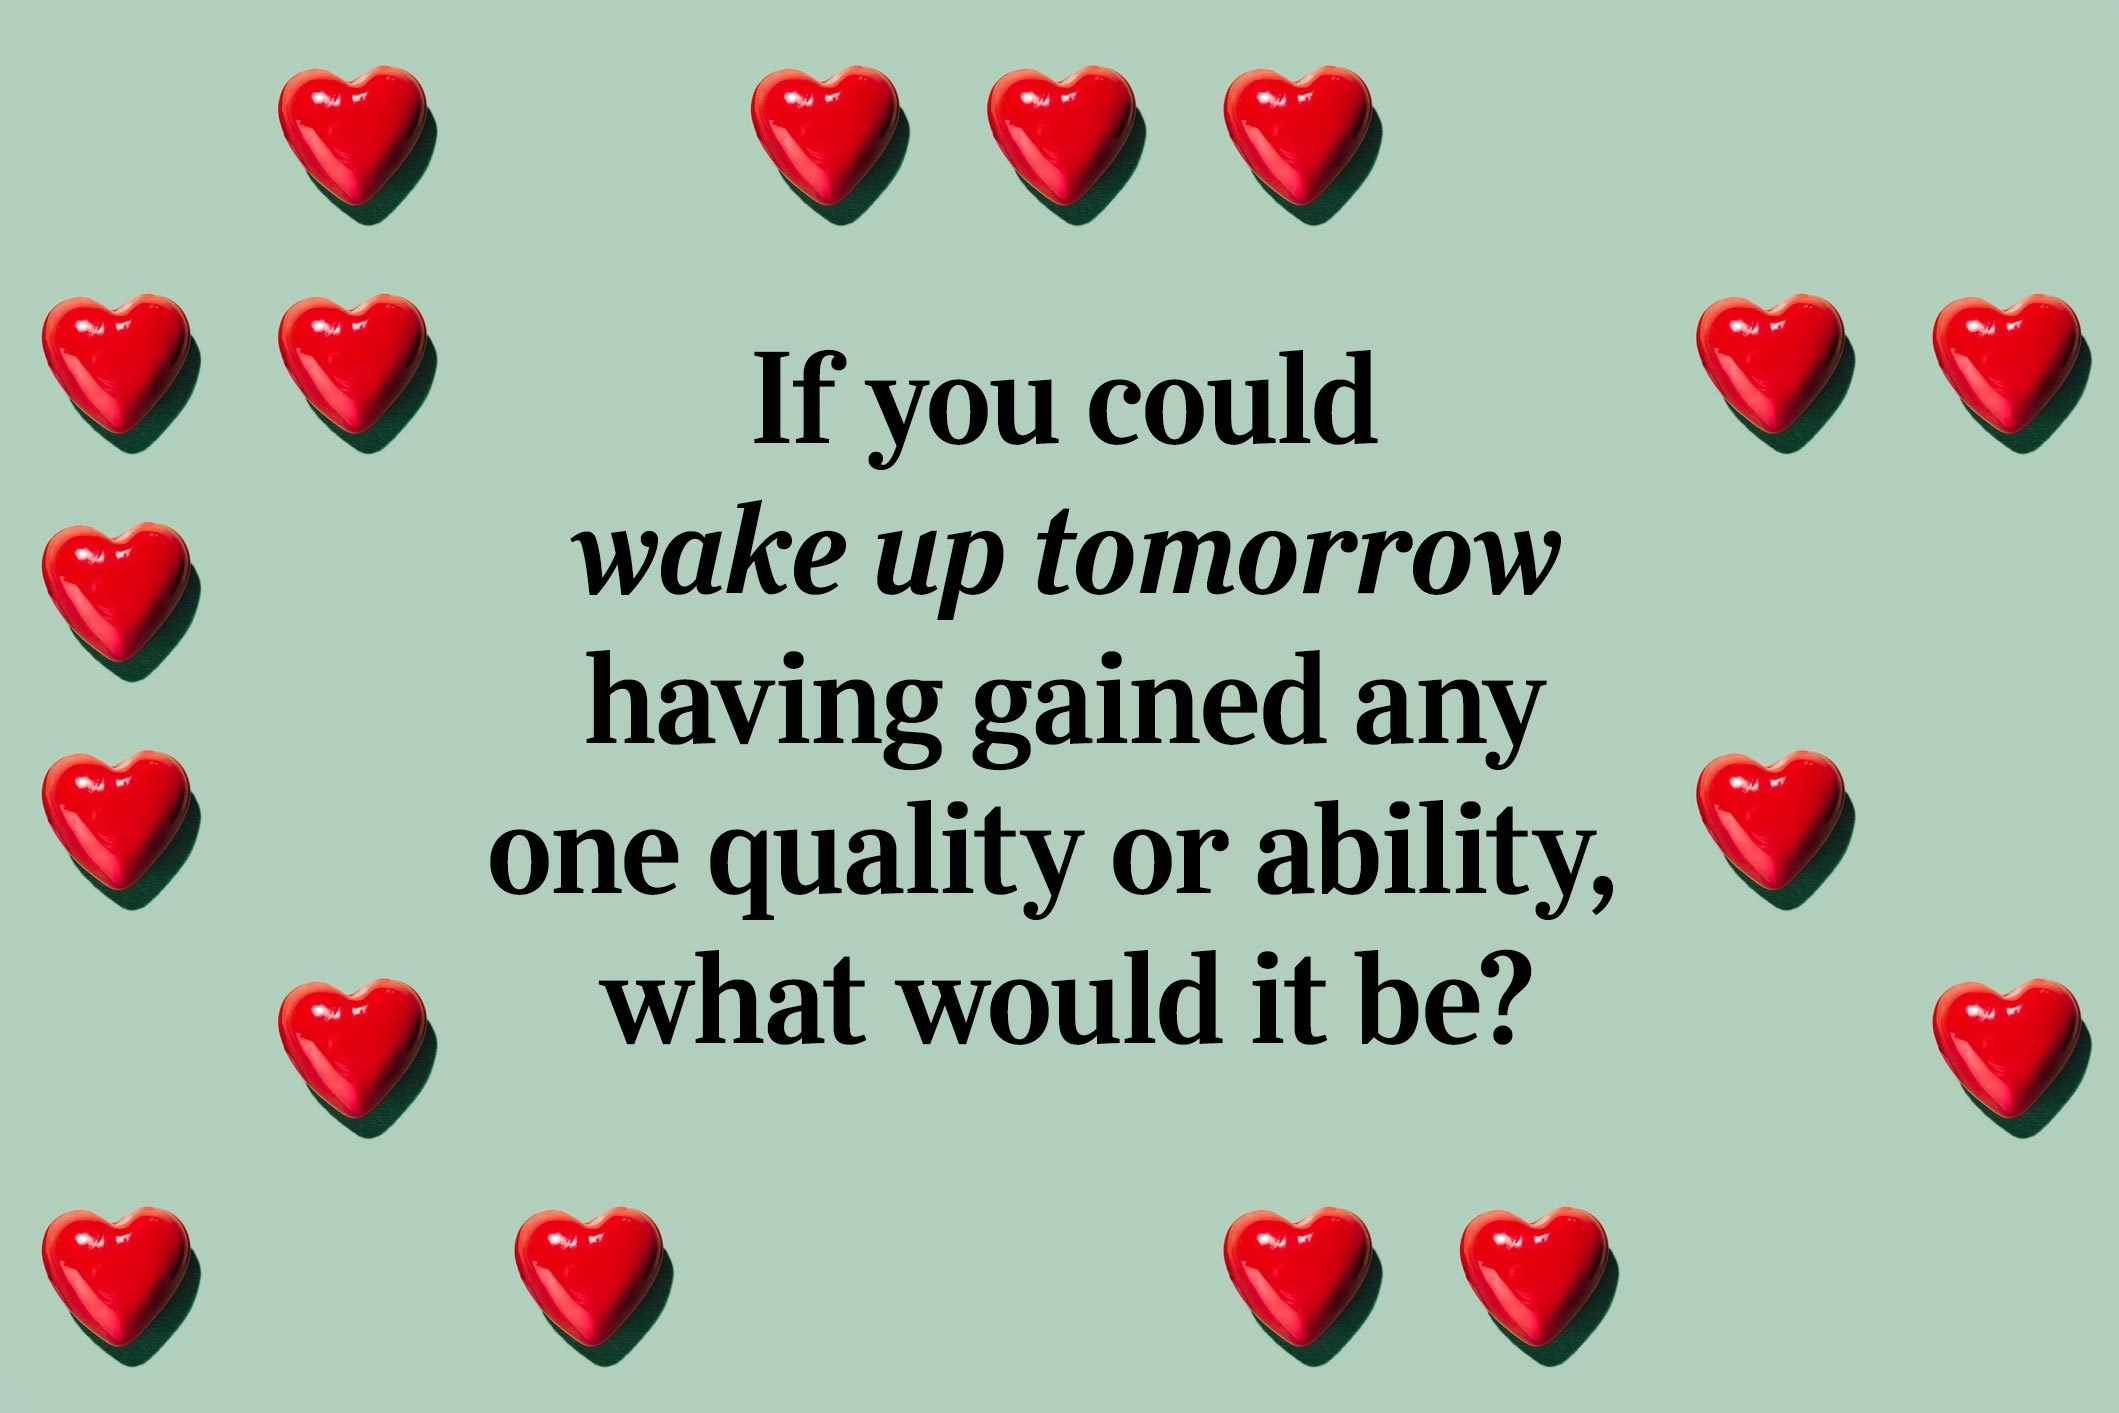 <p>If you could wake up tomorrow having gained any one quality or ability, what would it be?</p> <p>Of all these 36 questions that lead to love, this one is one of our favorites to think about! We also enjoy solving these fun <a href="https://www.rd.com/article/love-riddles/" rel="noopener">love riddles</a>.</p>